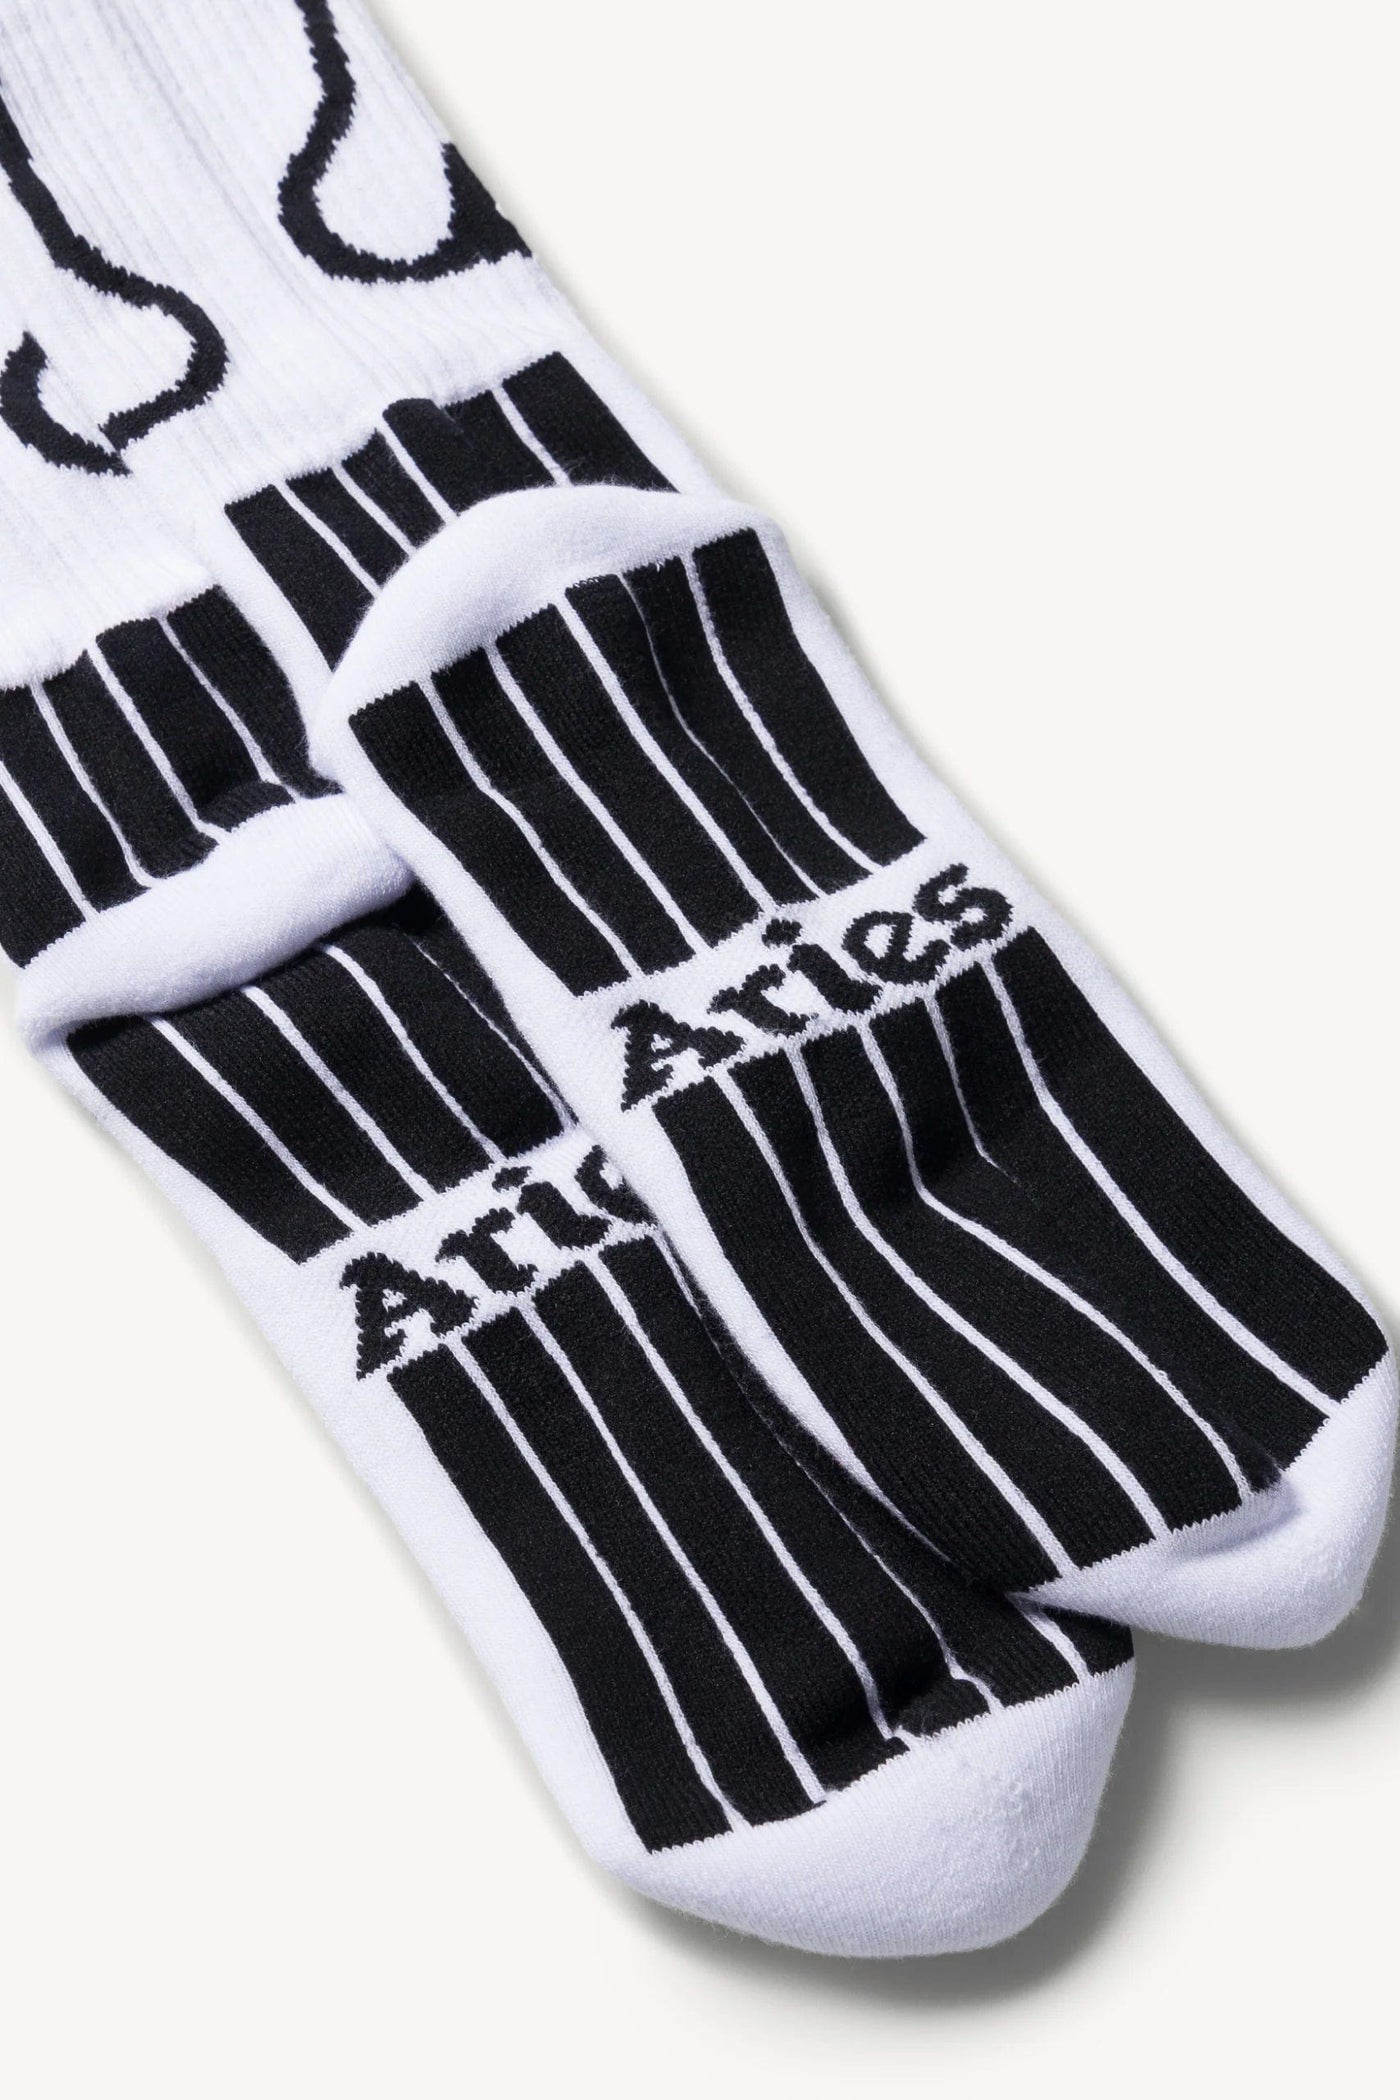 Aries Willy Sock